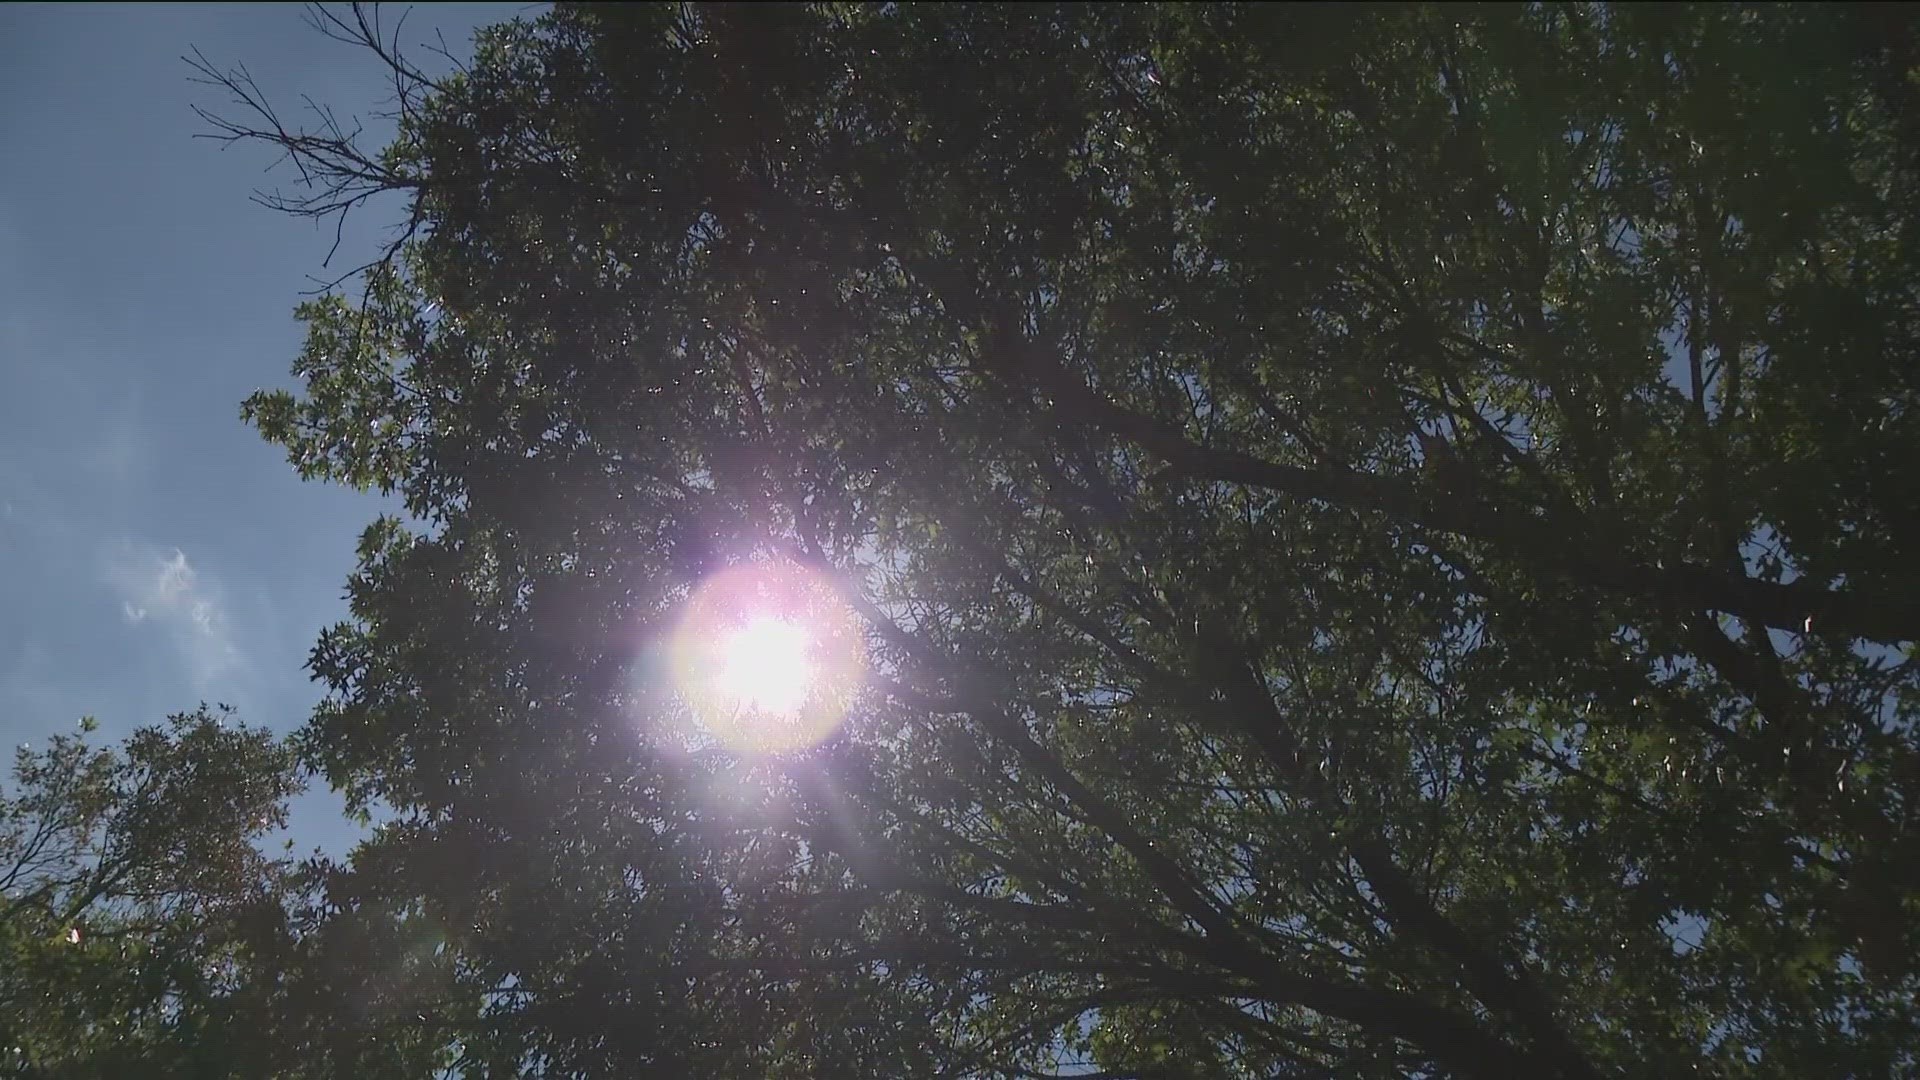 The extreme heat and little rainfall has been hard on trees throughout Texas.